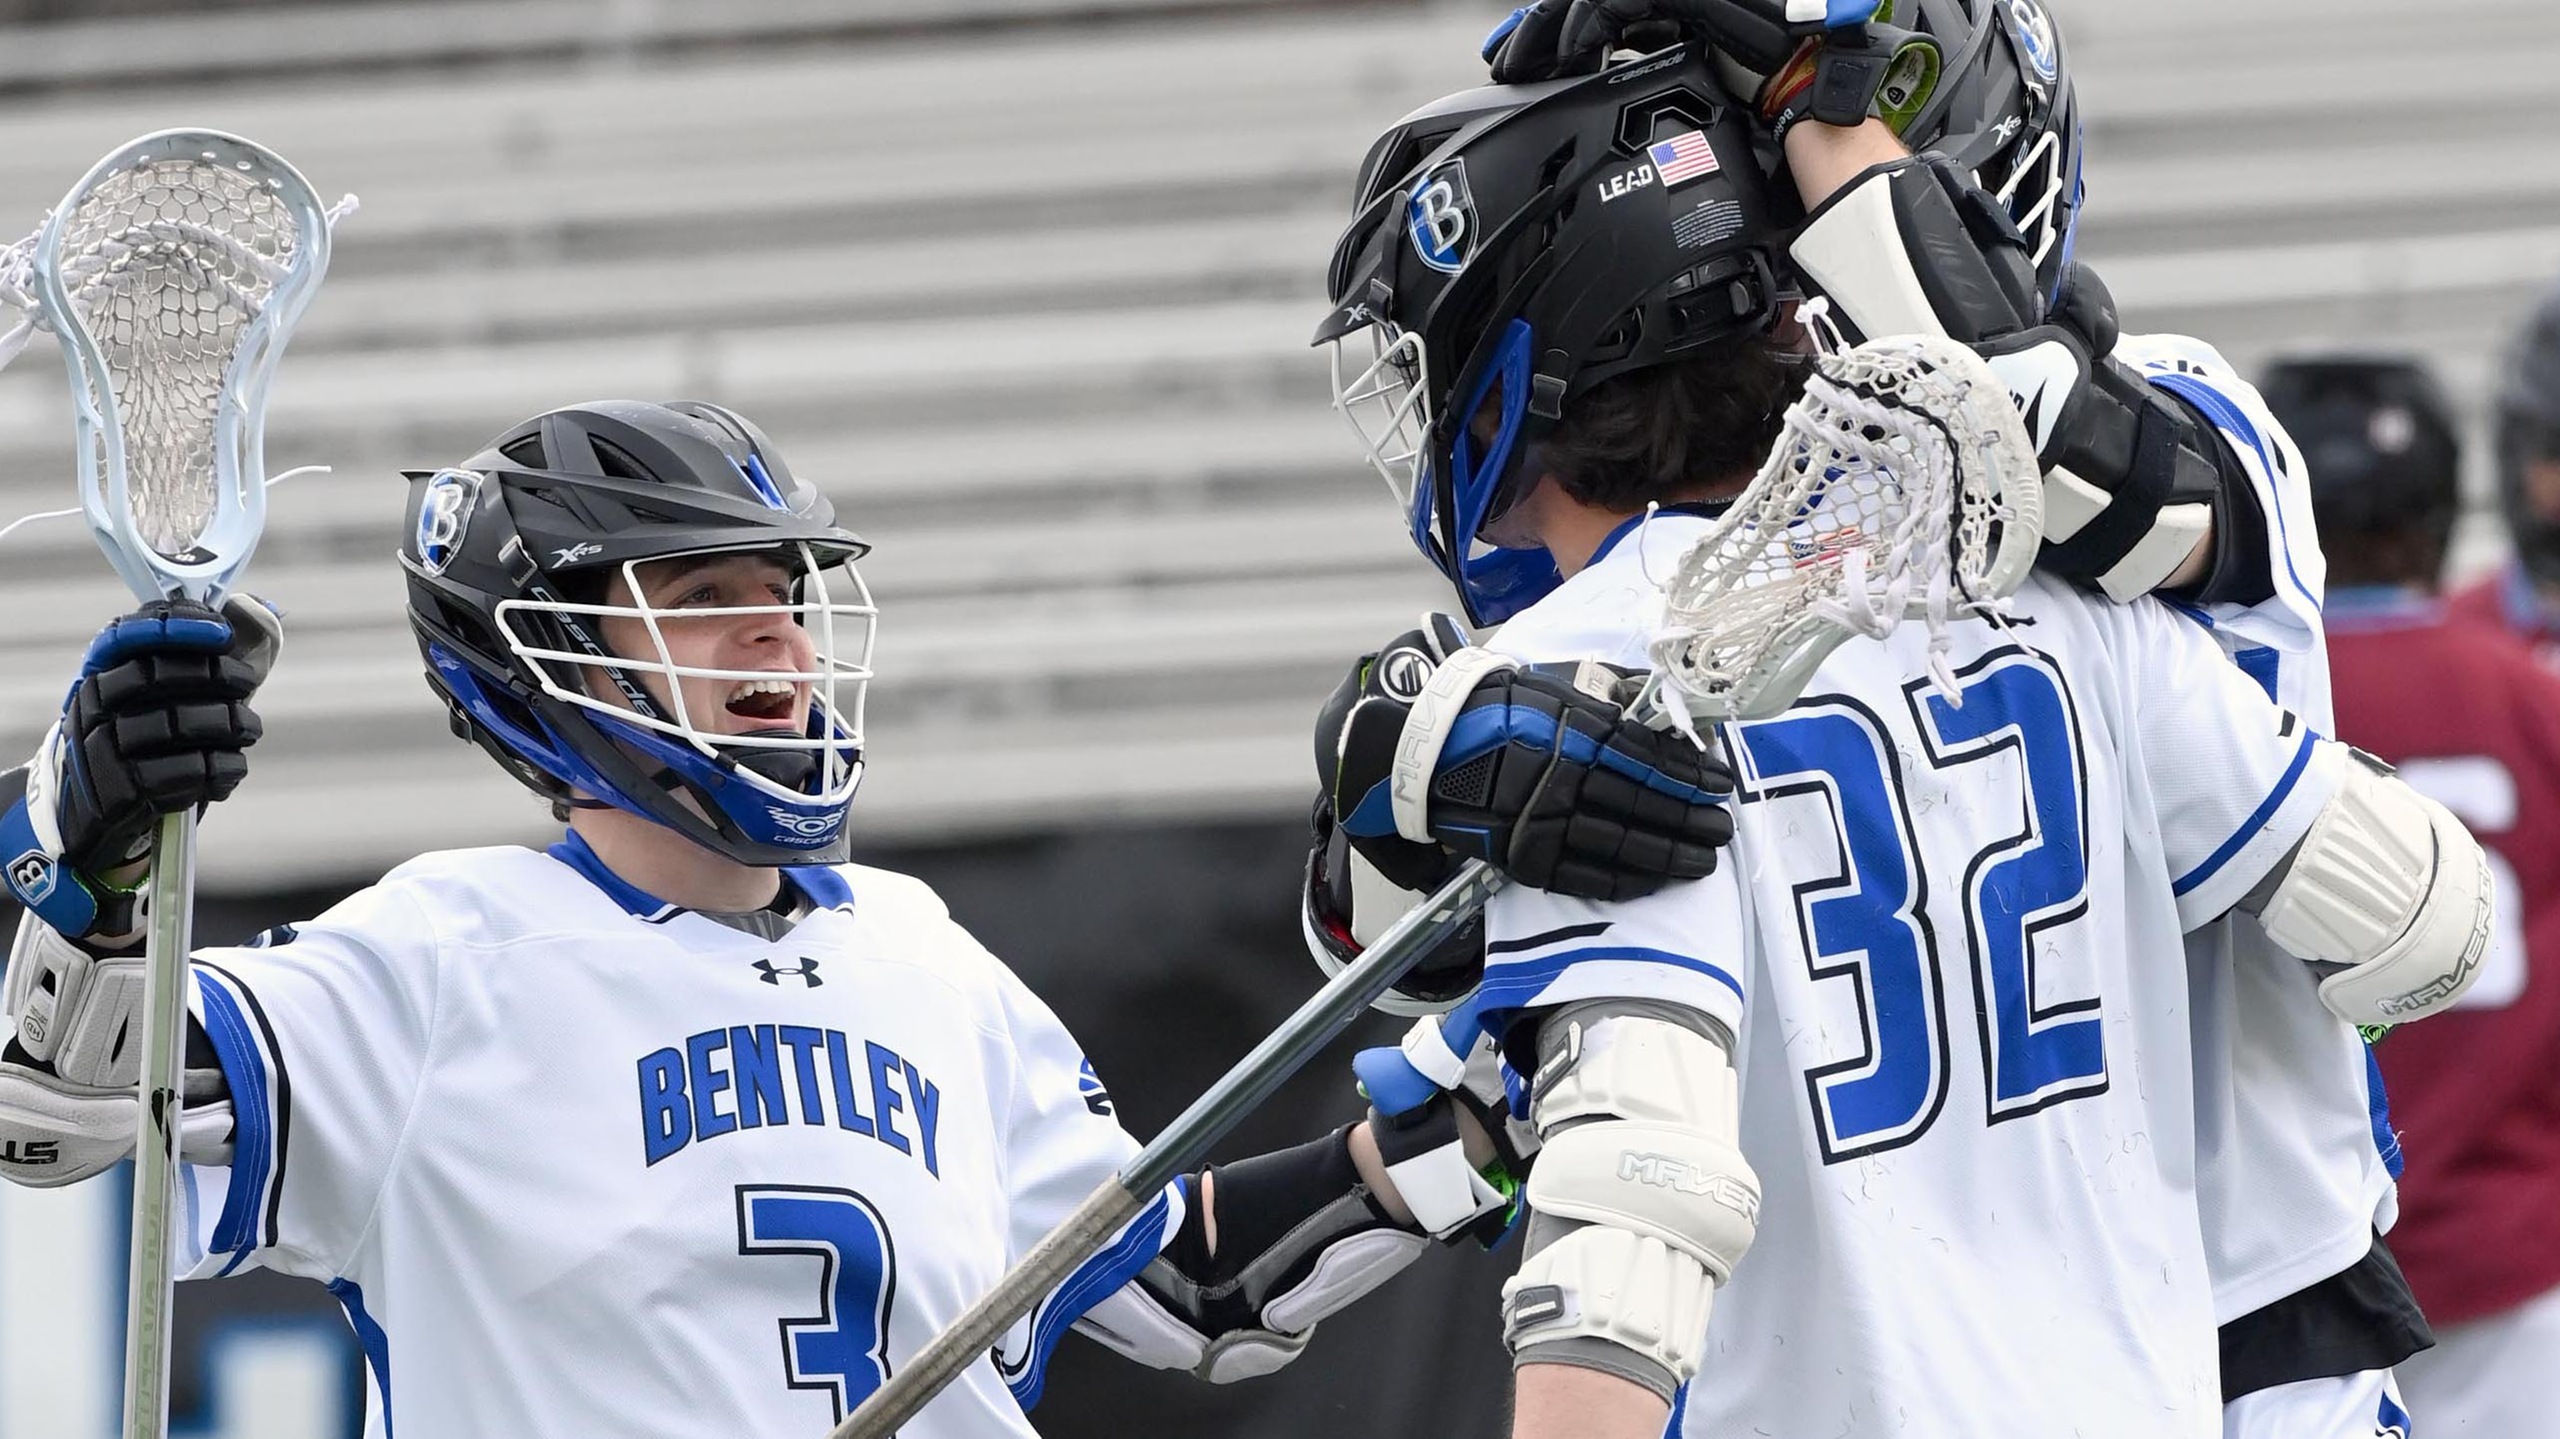 Five Men’s Lacrosse Players Earn Place on NEILA All-Academic Team